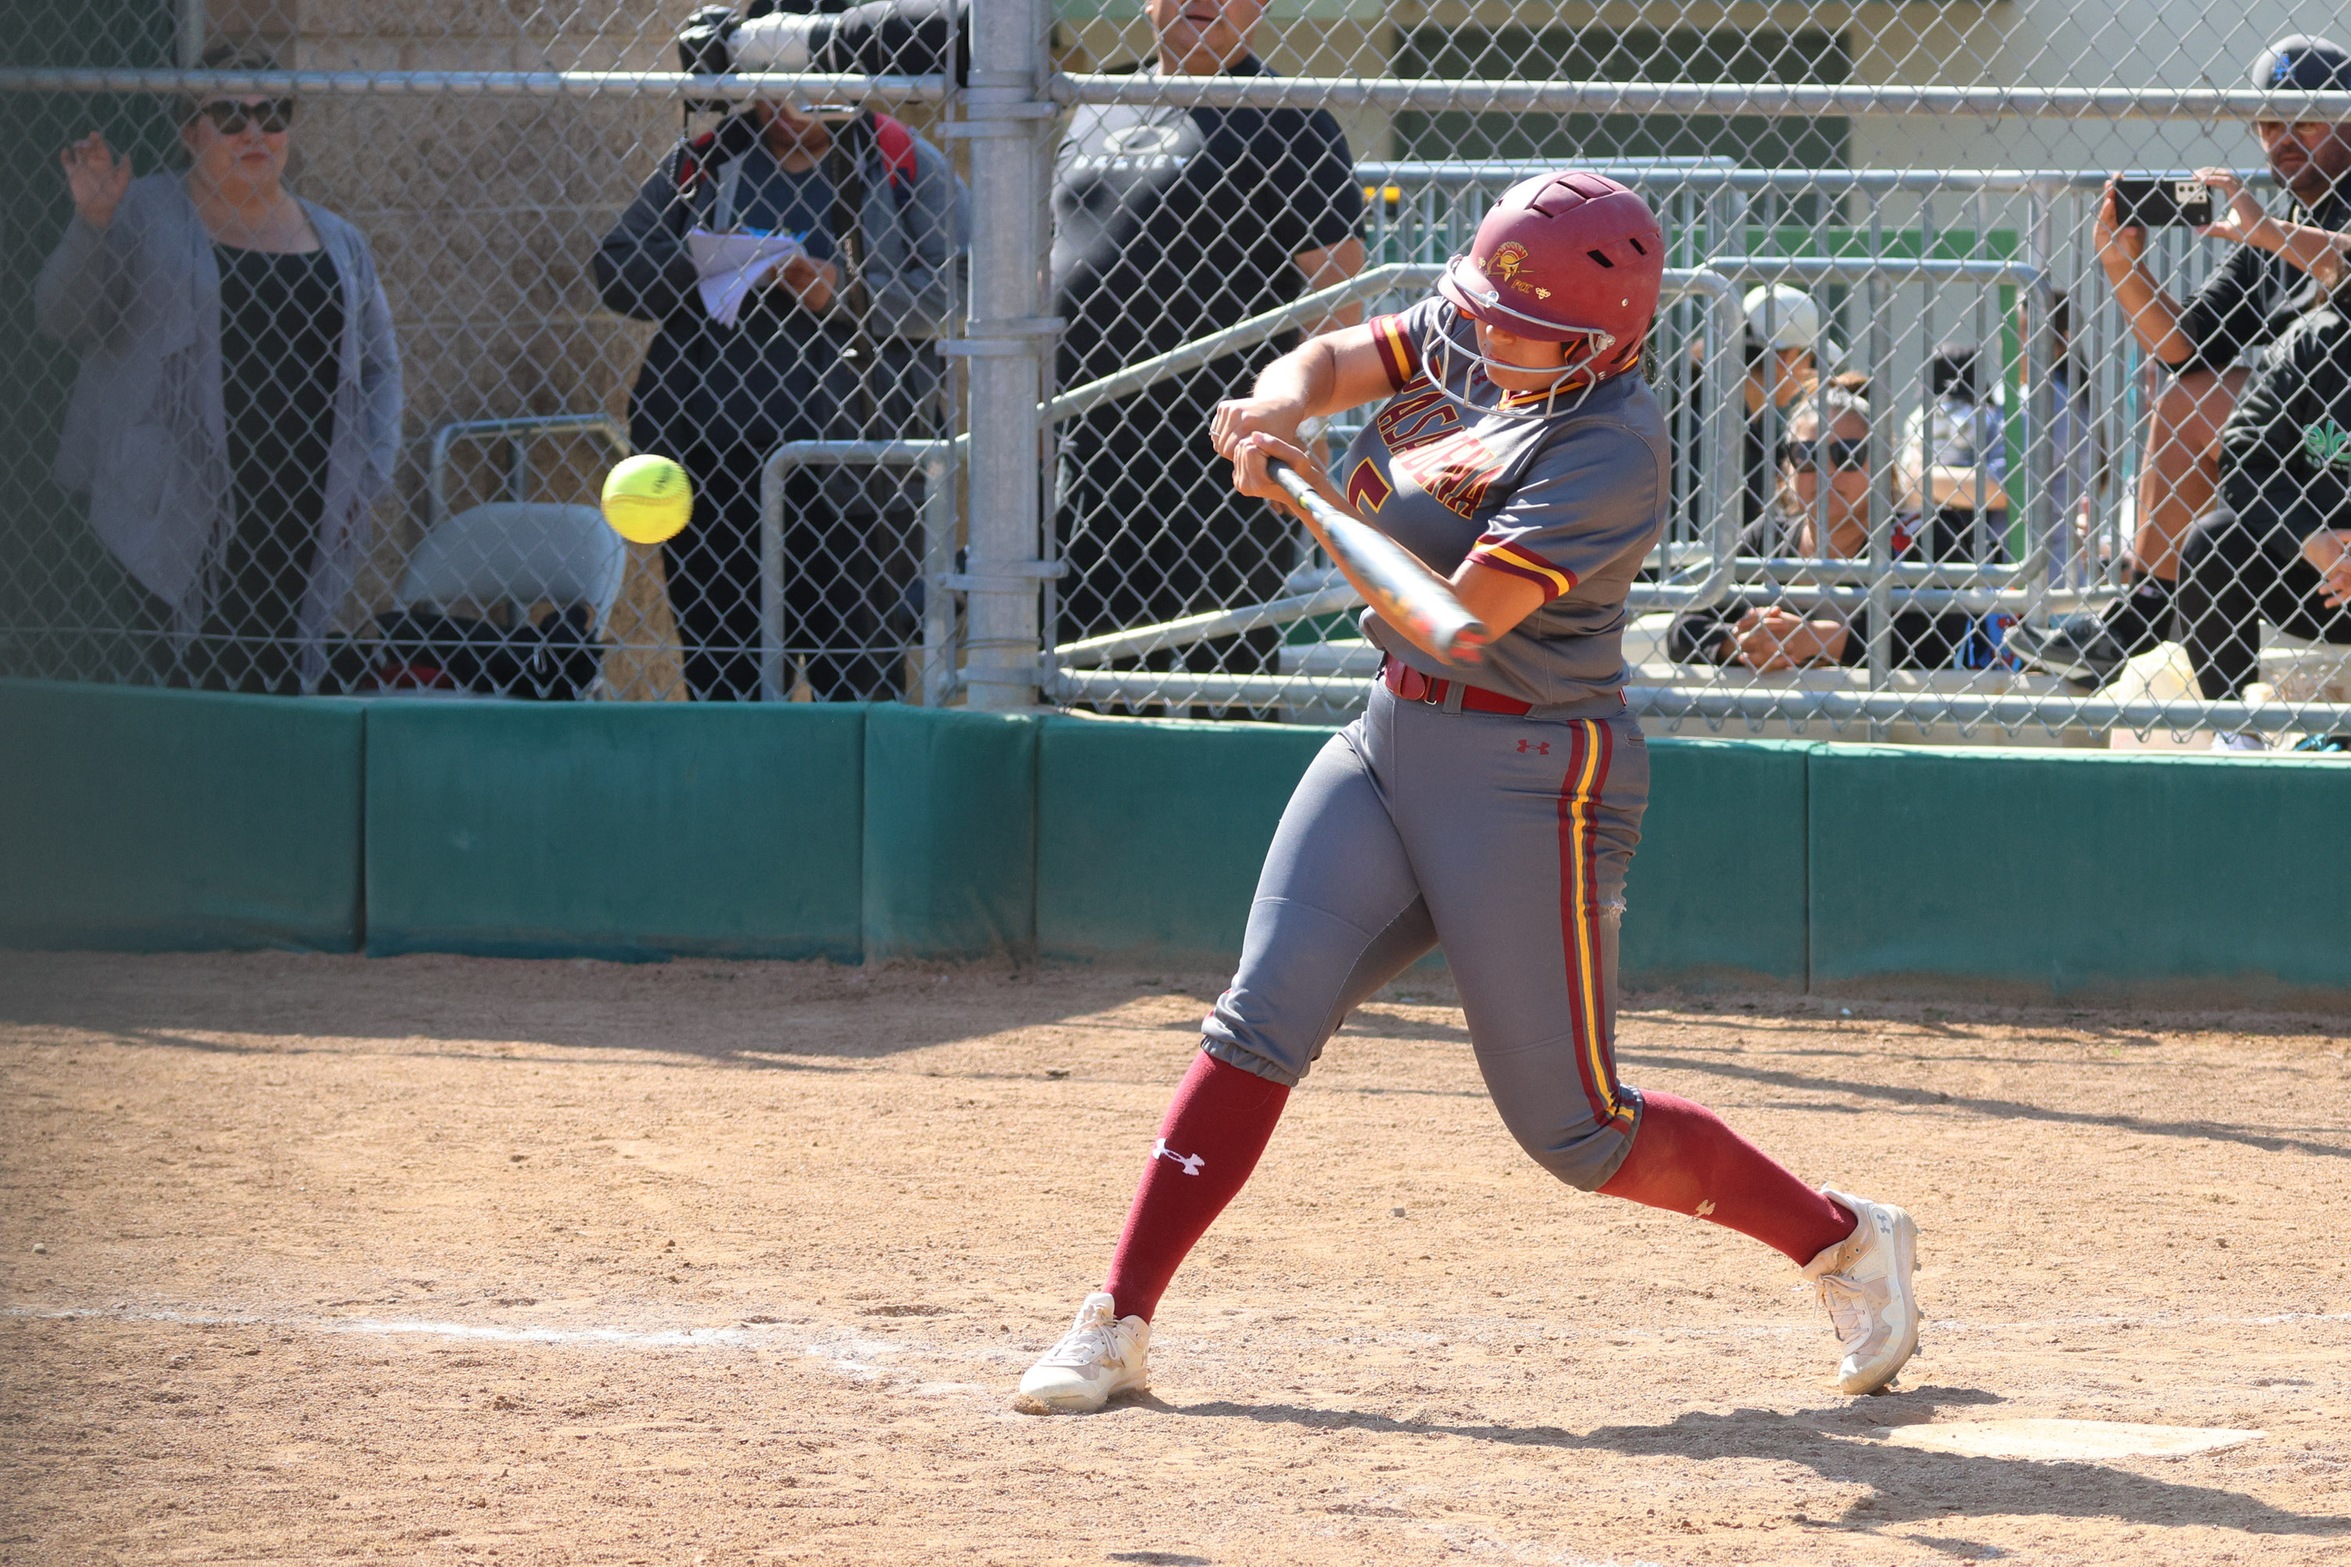 Marcella Ordonez reached base safely 14 times in 23 plate appearances this week for the Lancers (photo by Richard Quinton).